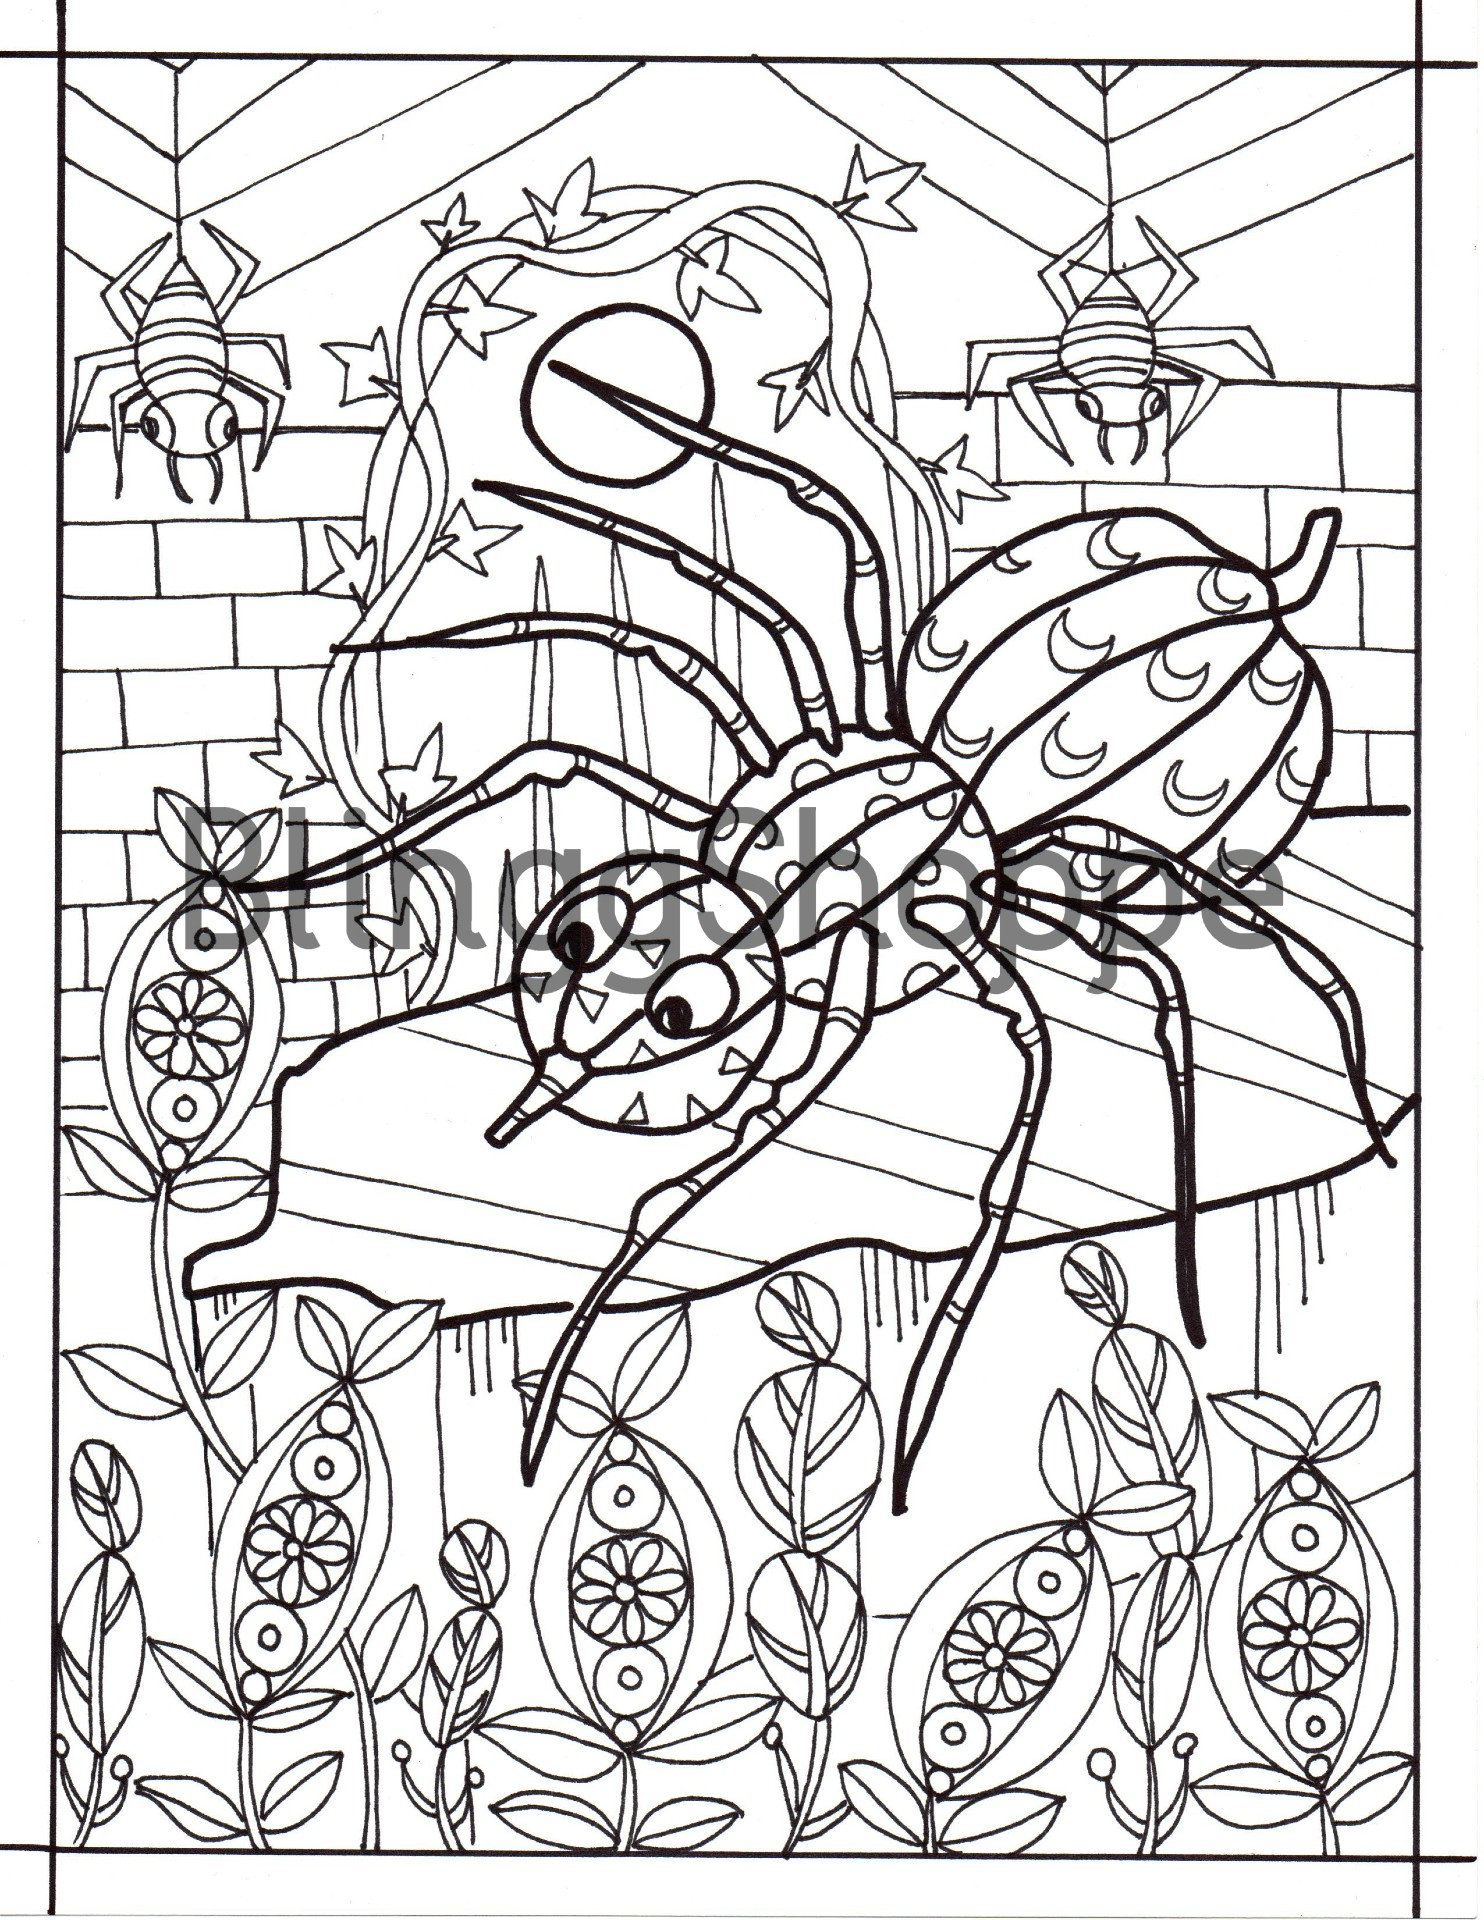 Adult coloring pages halloween adult coloring pages spider printable coloring pages instant download